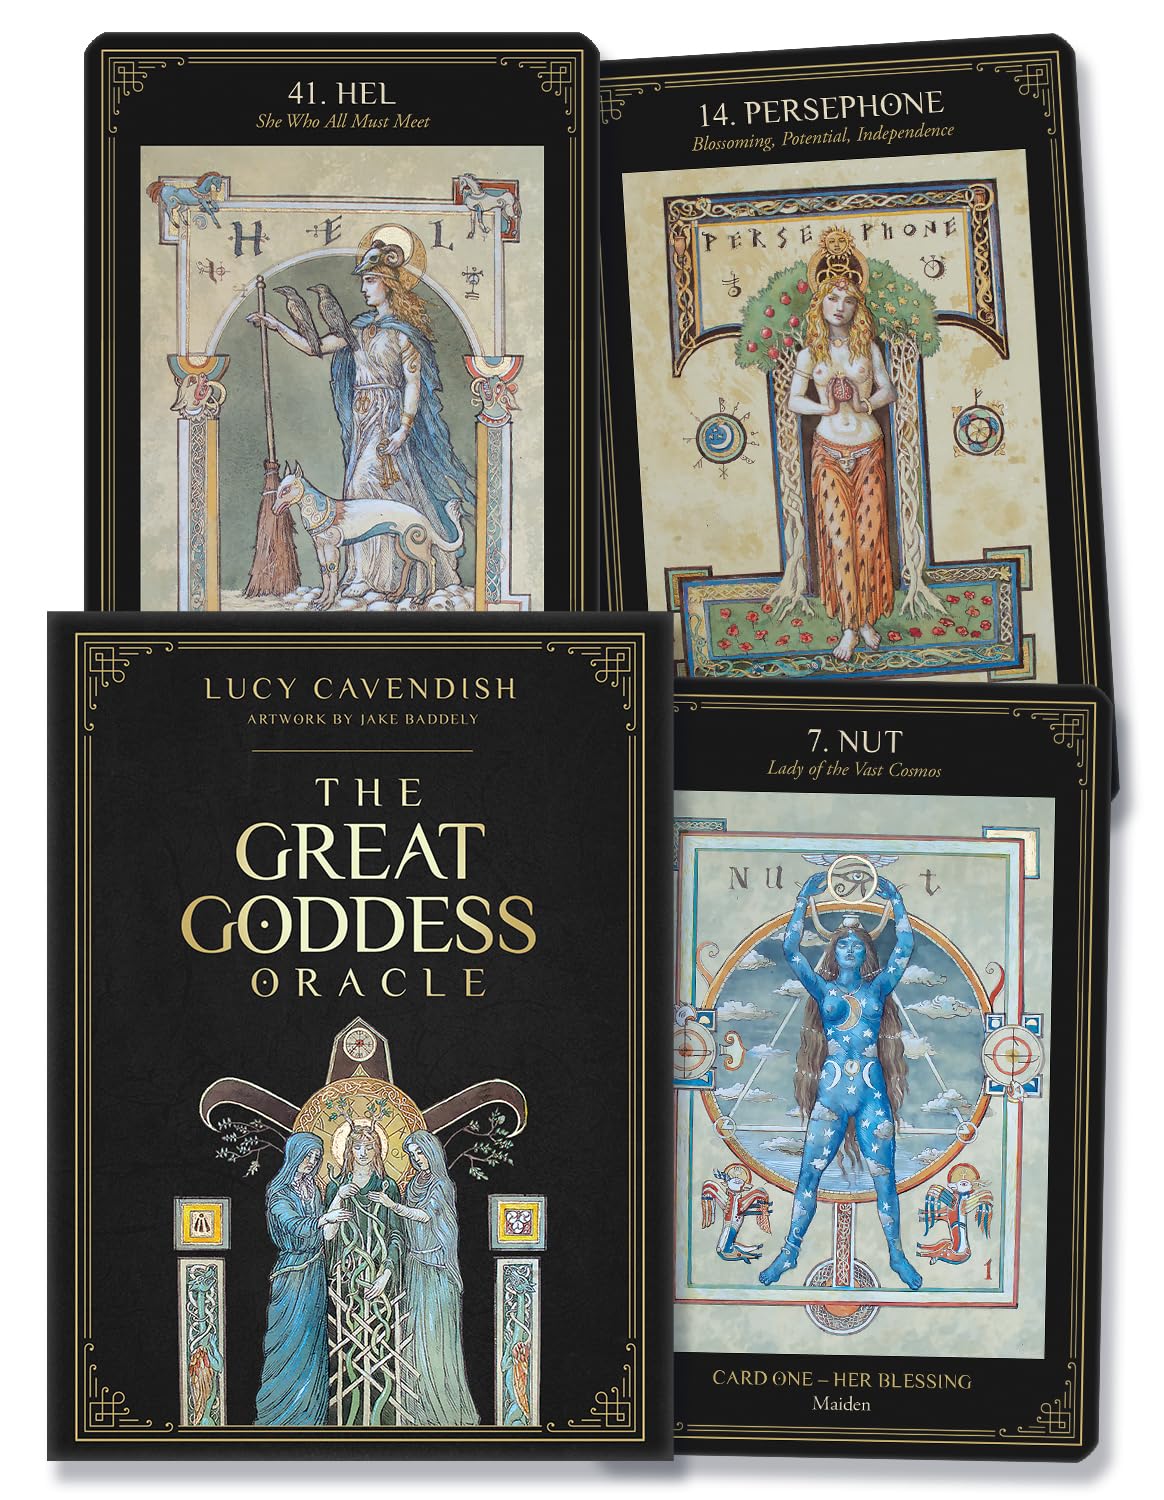 The Great Goddess Oracle by Lucy Cavendish